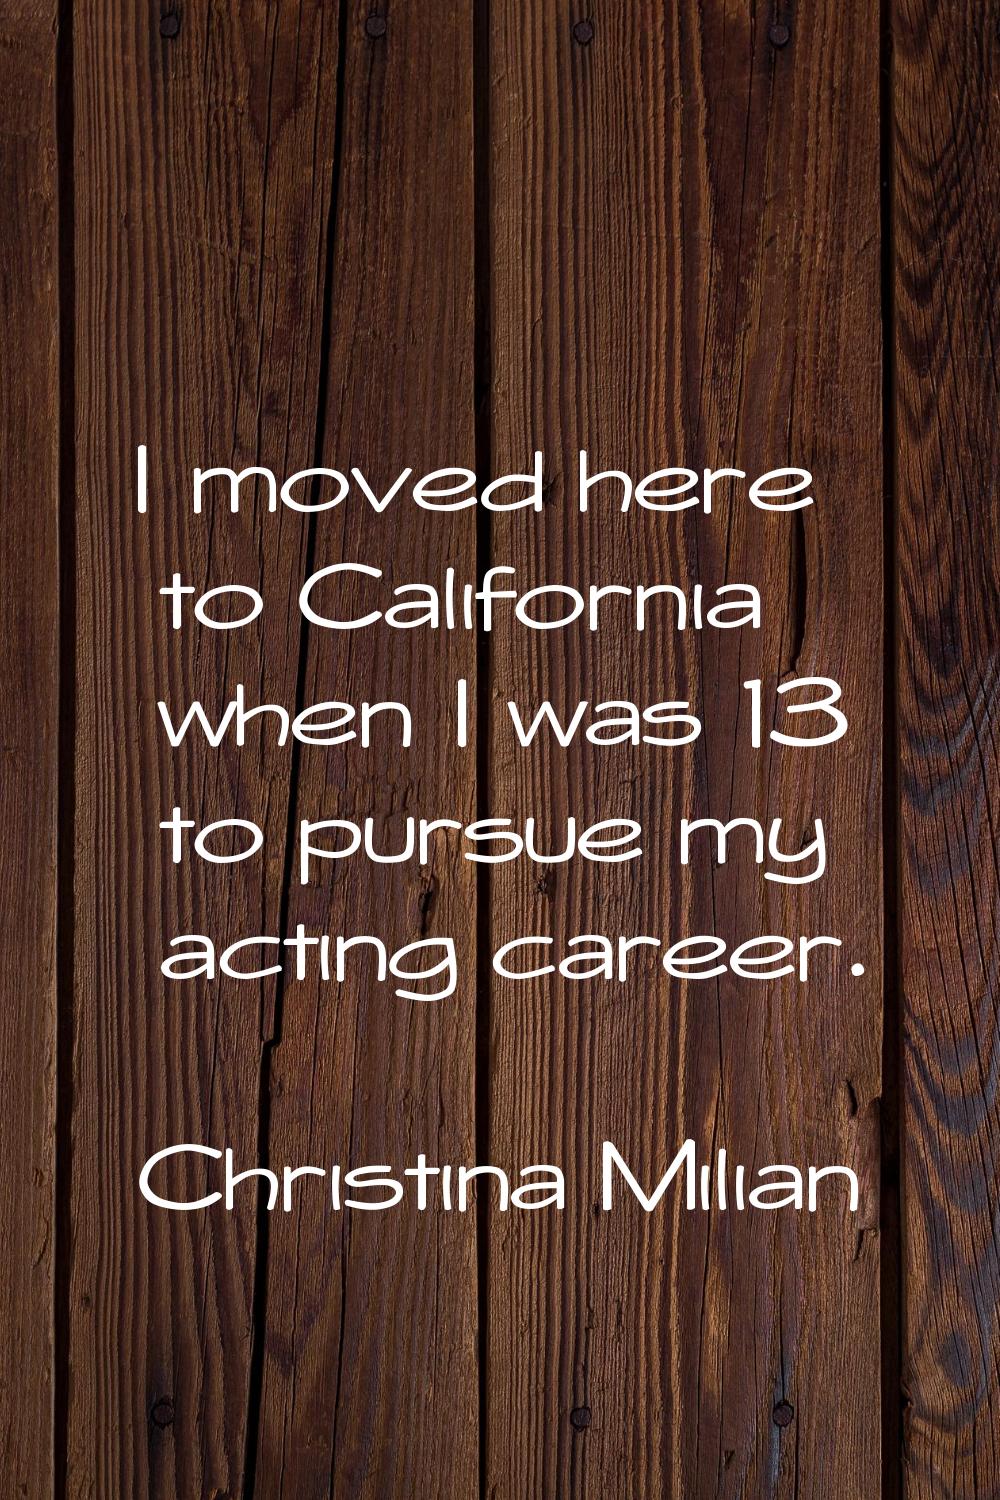 I moved here to California when I was 13 to pursue my acting career.